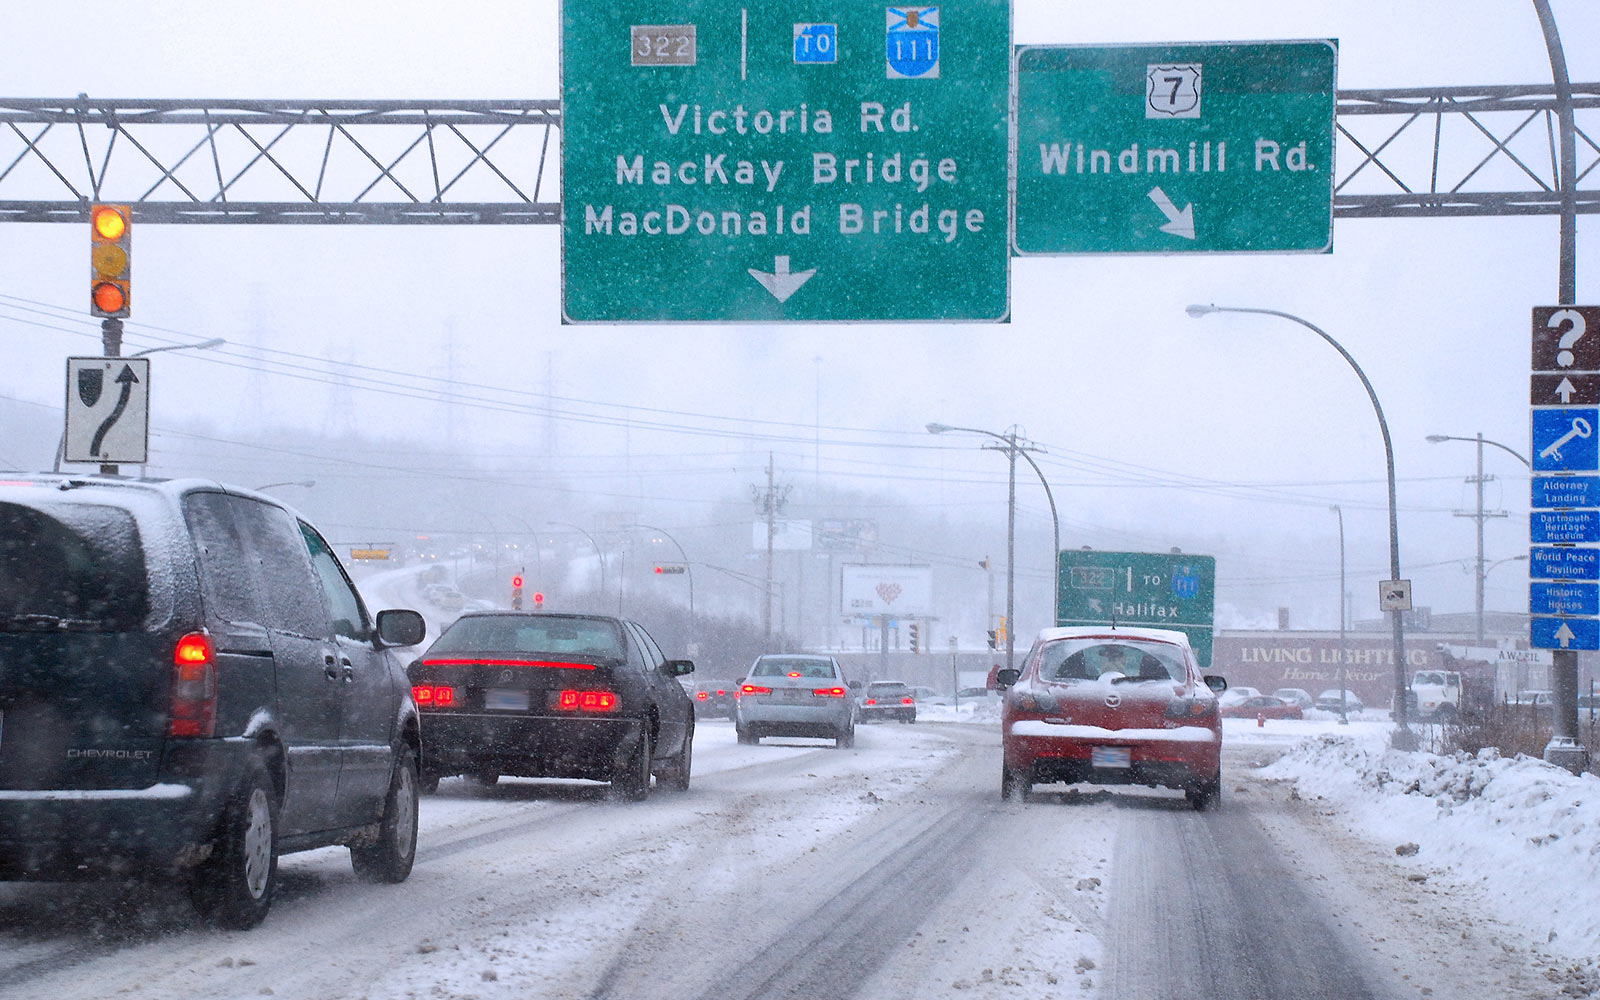 Winter Driving Safety Tips to Carry into the Beginning of the Season